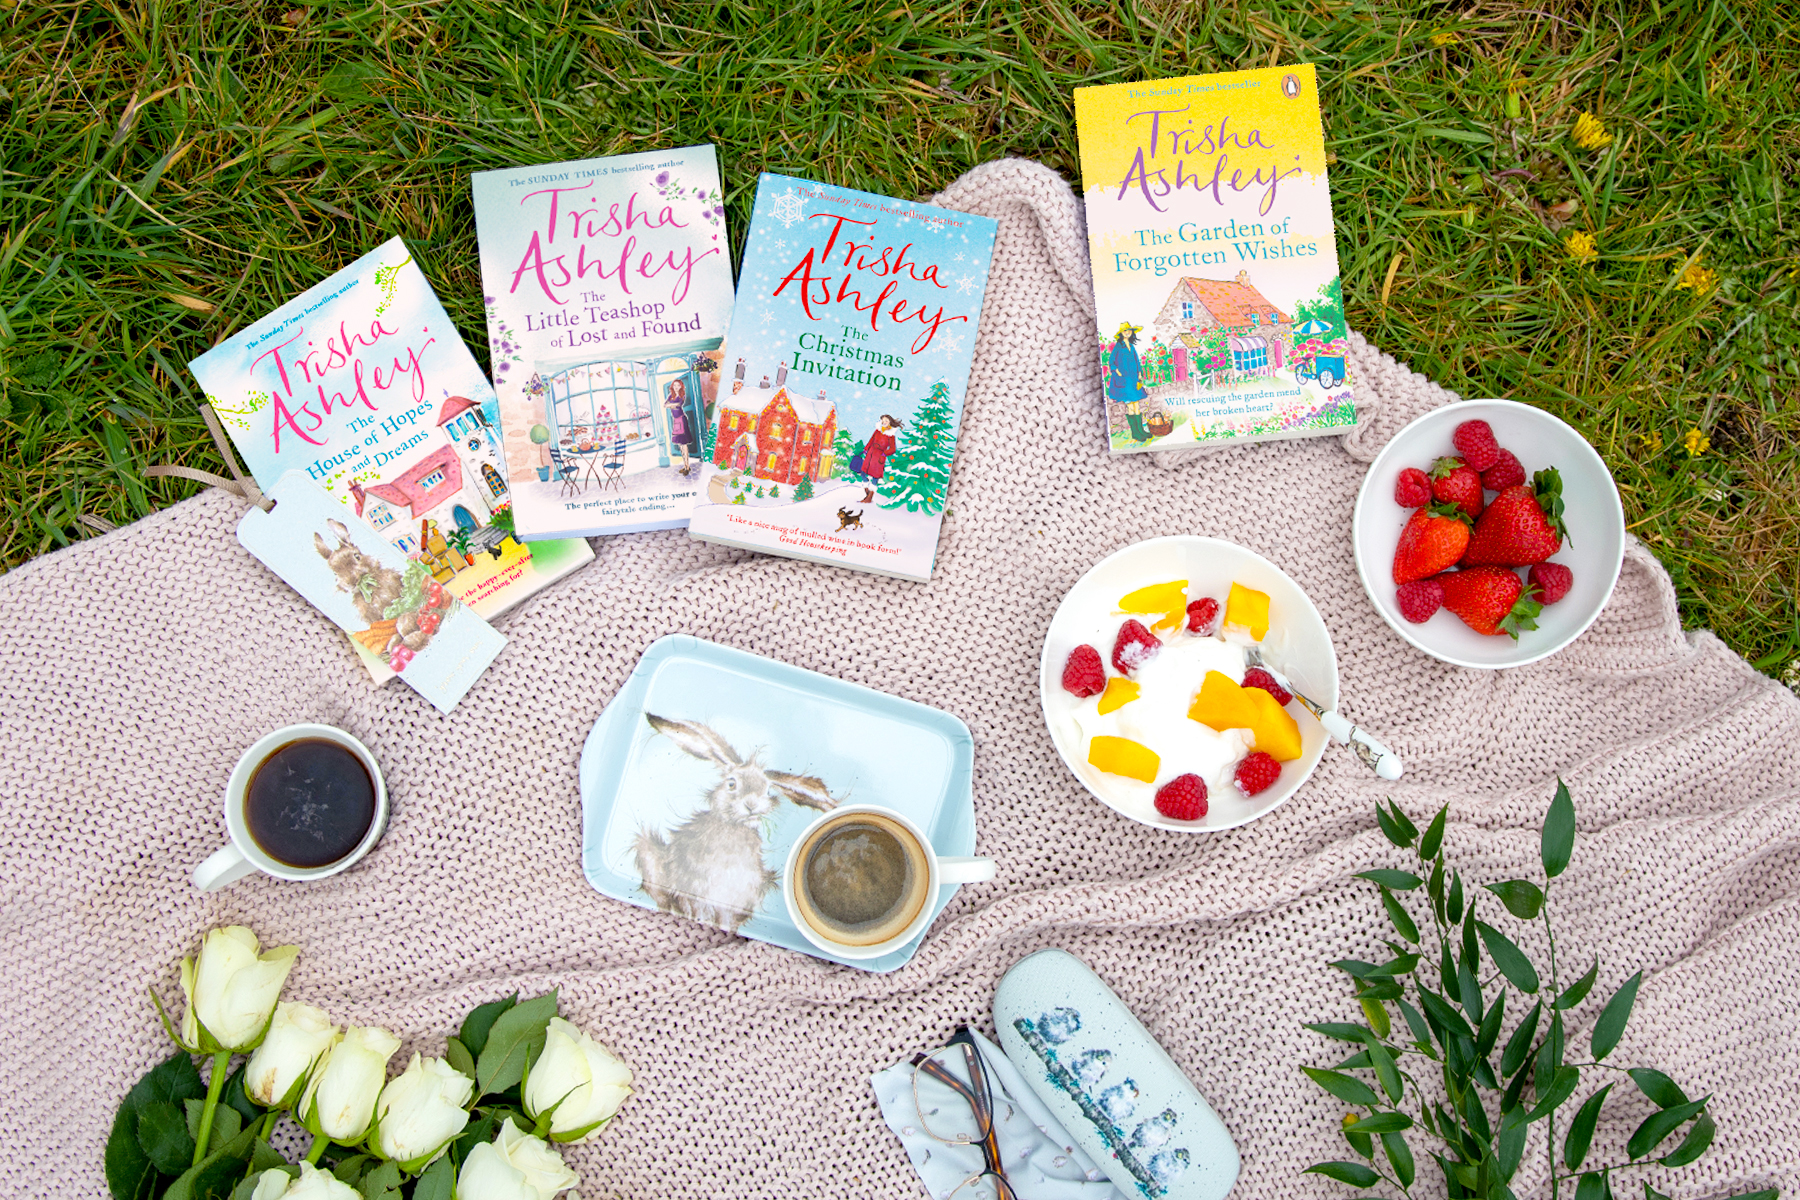 A photo of a variety of Trisha Ashley books on a picnic blanket with tea, fruit and more, on grass.